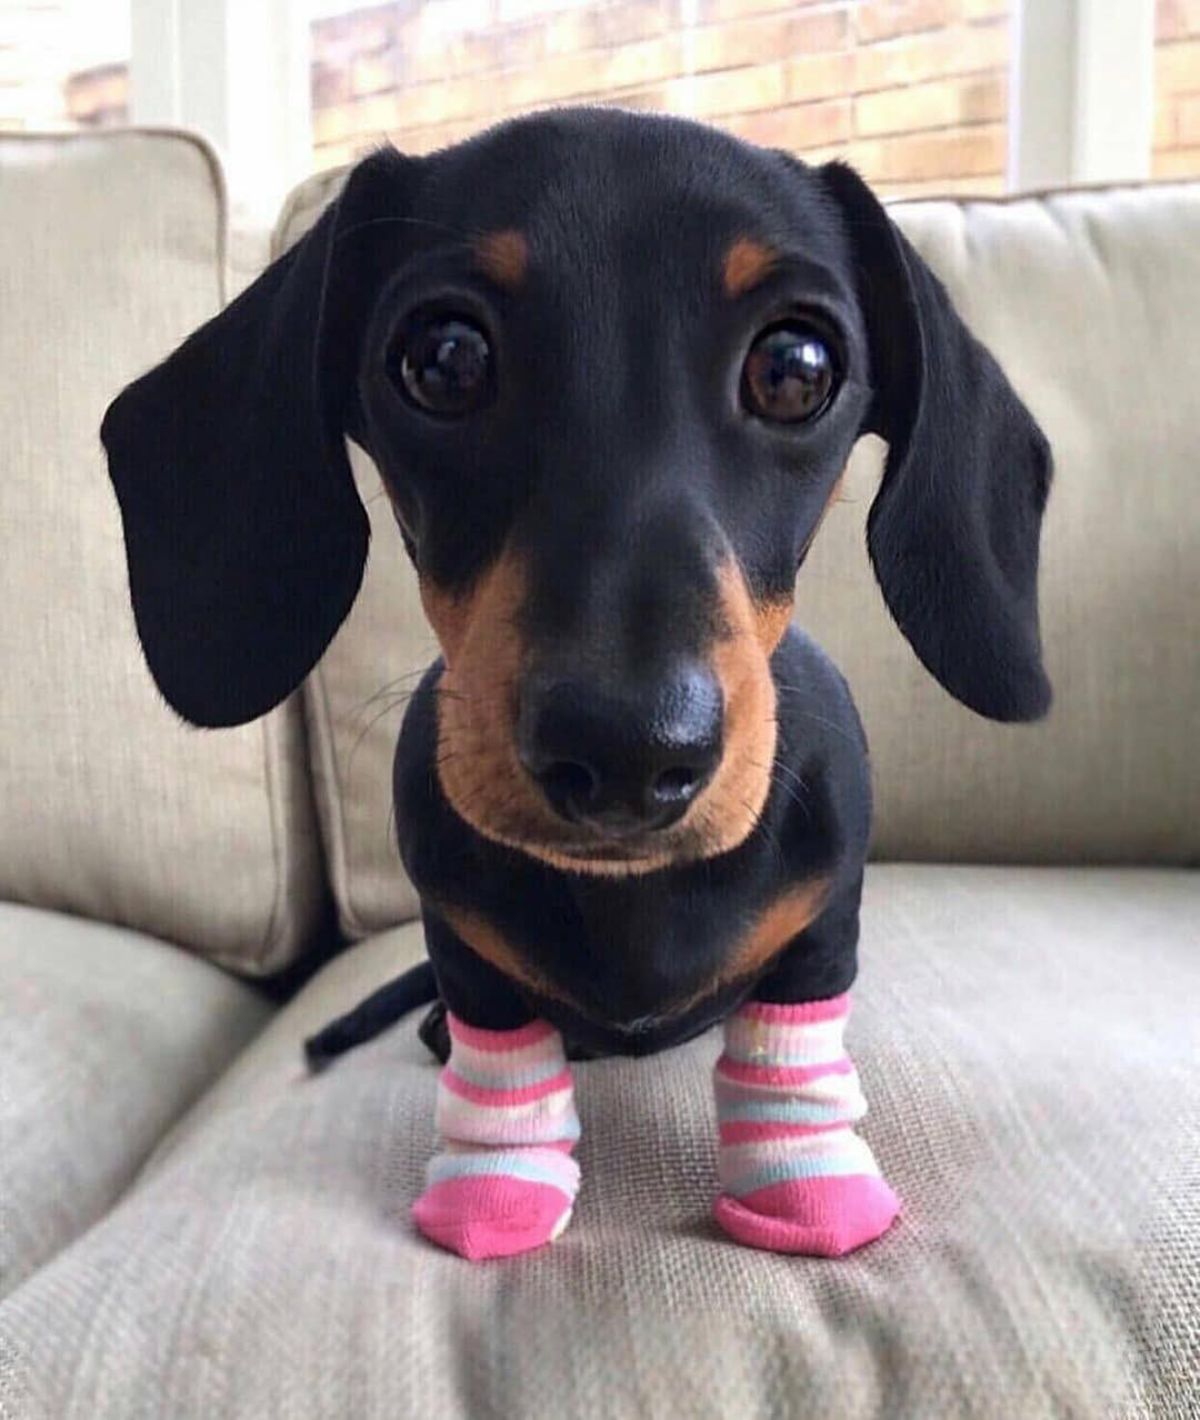 black dachshund on grey couch wearing pink and white socks